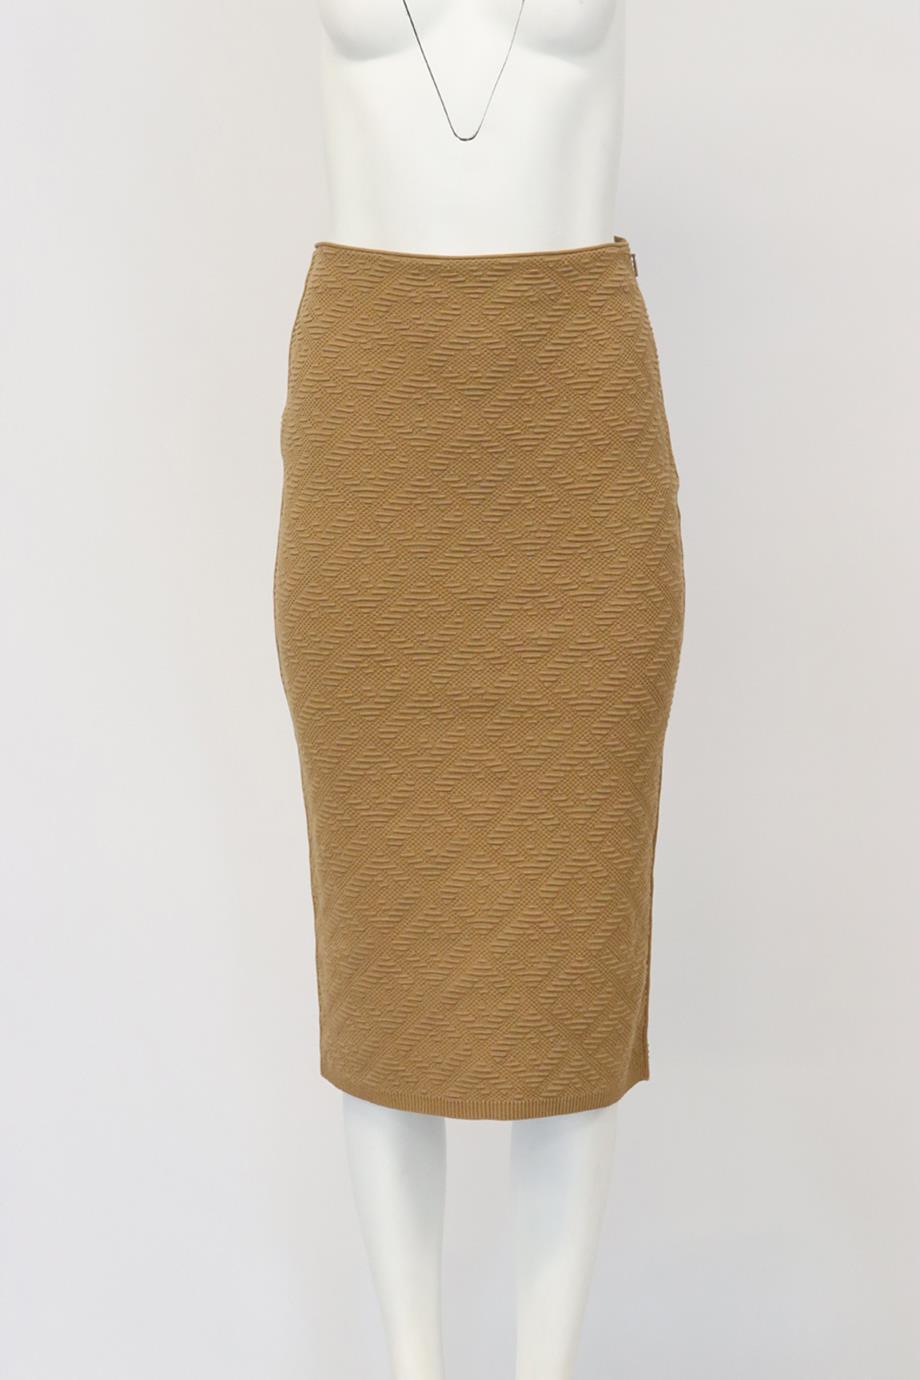 Fendi Ff Jacquard Stretch Knit Midi Skirt. Tan. Zip fastening - Side. 67% Viscose, 33% polyester. IT 38 (UK 6, US 2, FR 34). Waist: 27 in. Hips: 32.5 in. Length: 29 in. Condition: New with tags.